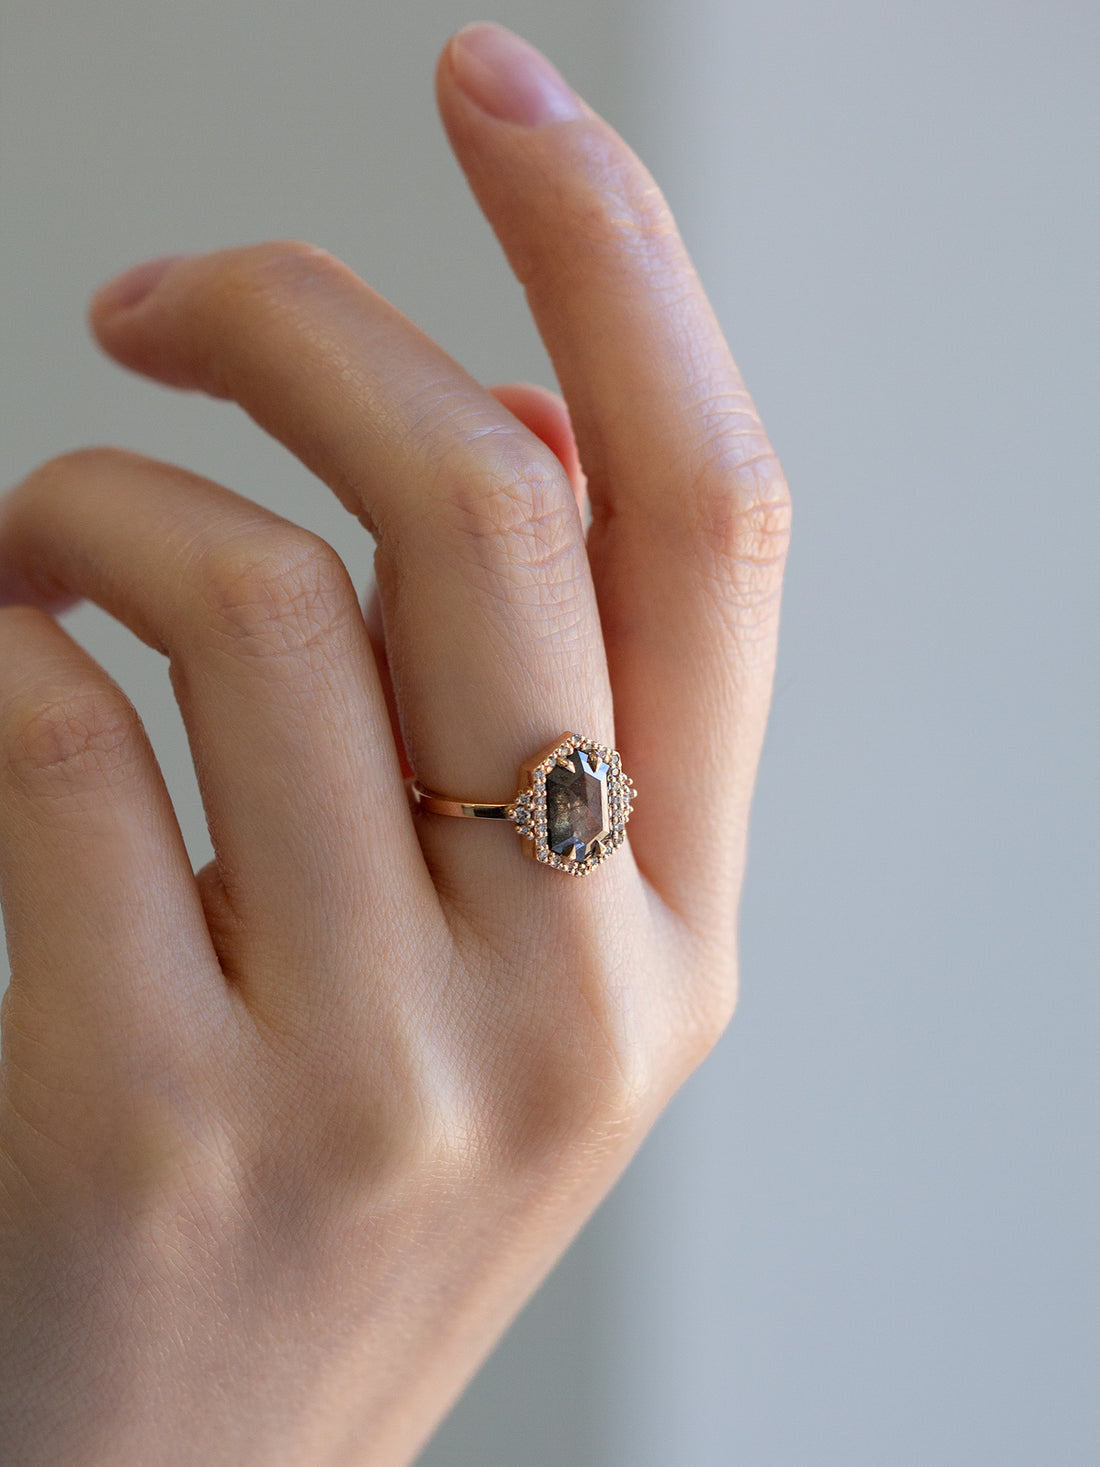 Unique art deco styled hexagon salt and pepper diamond engagement ring in 14k rose gold with round diamonds 3